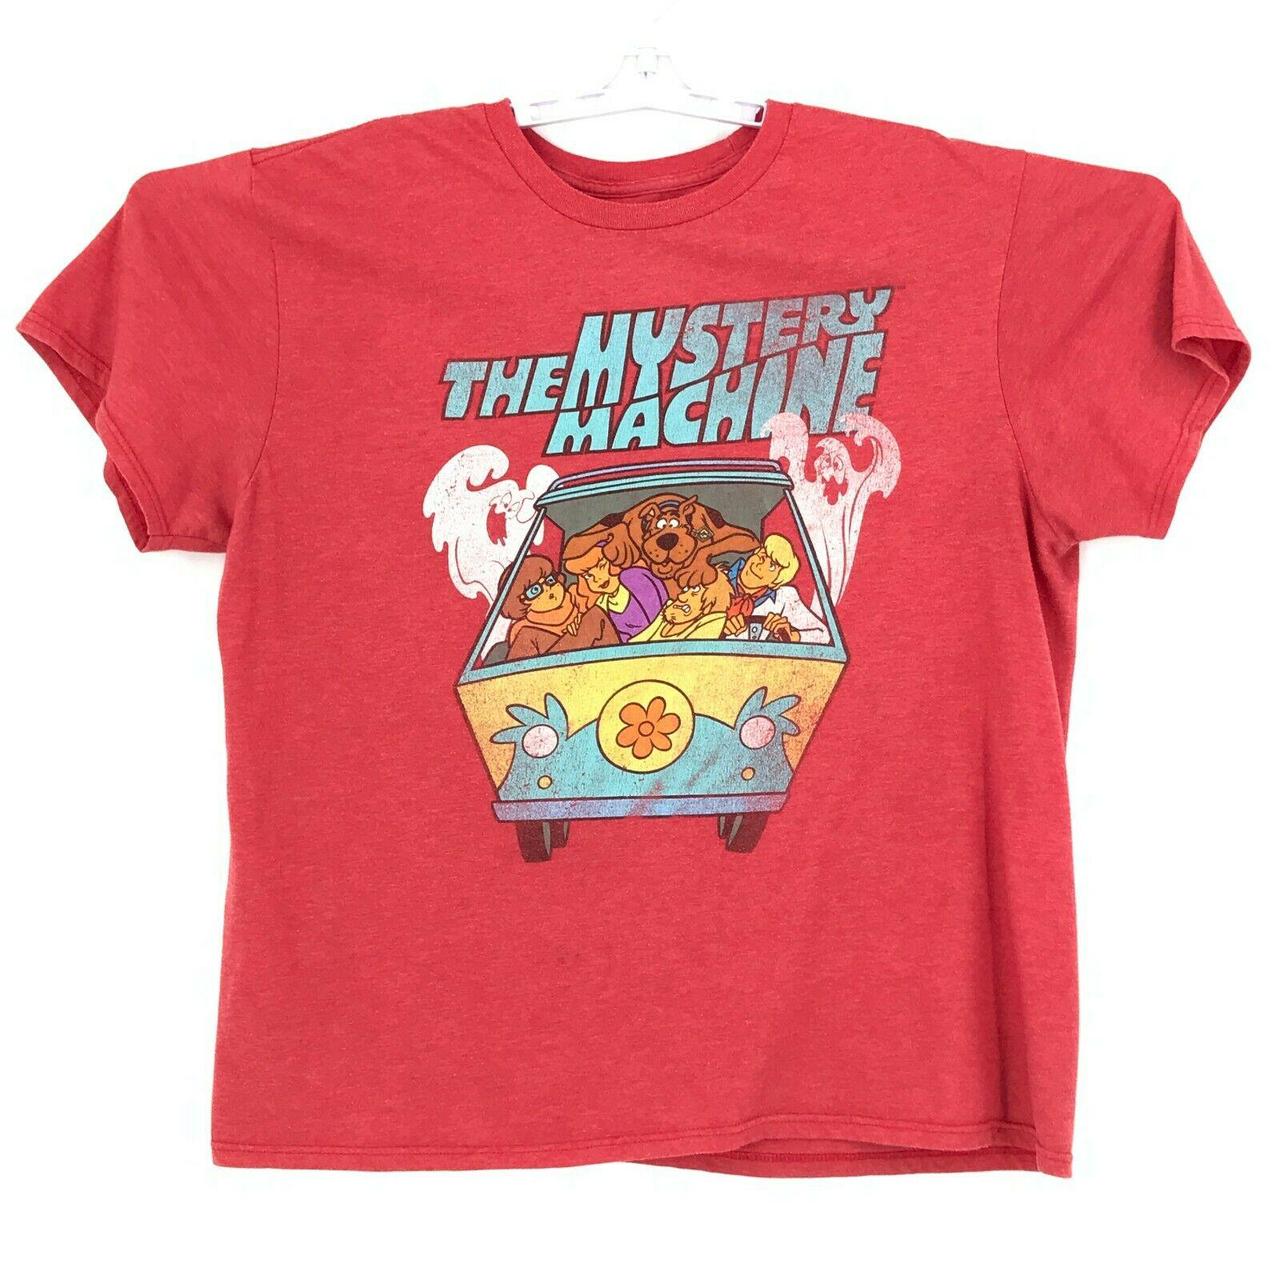 Product Image 1 - Scooby-Doo T-Shirt Adult XL Red